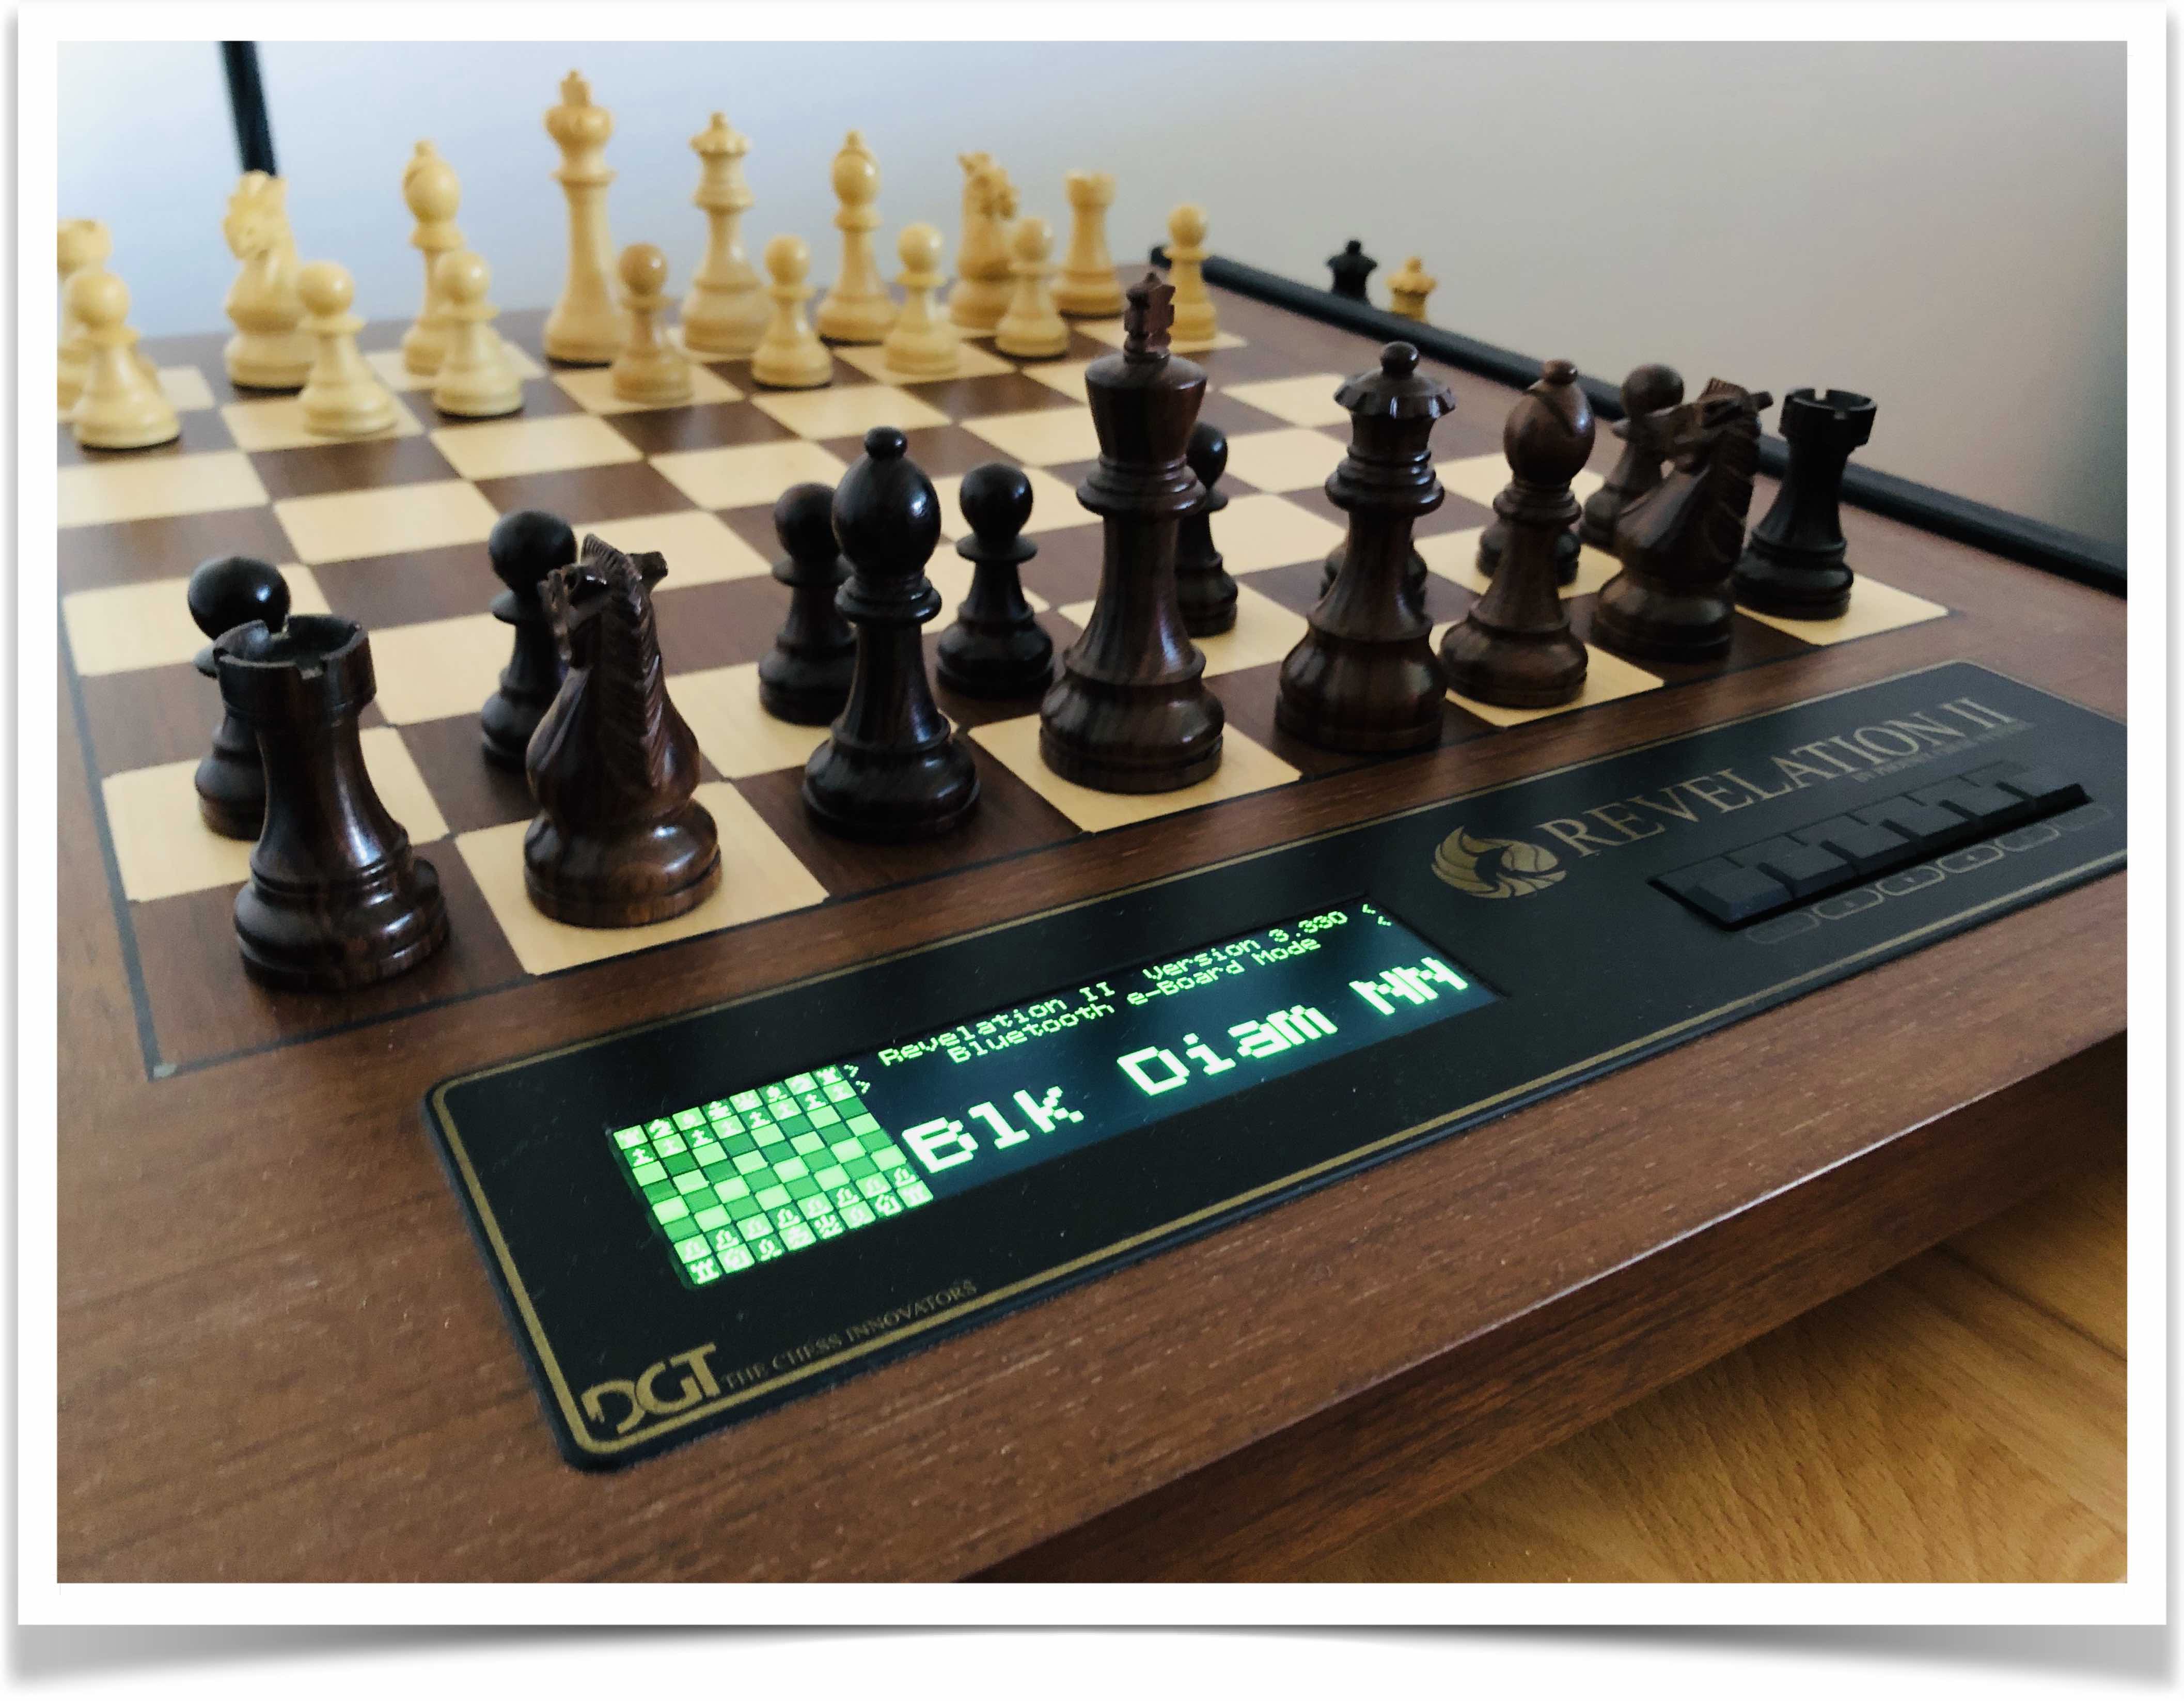 An Ancient Chess Puzzle That Engines CAN'T Solve! - Remote Chess